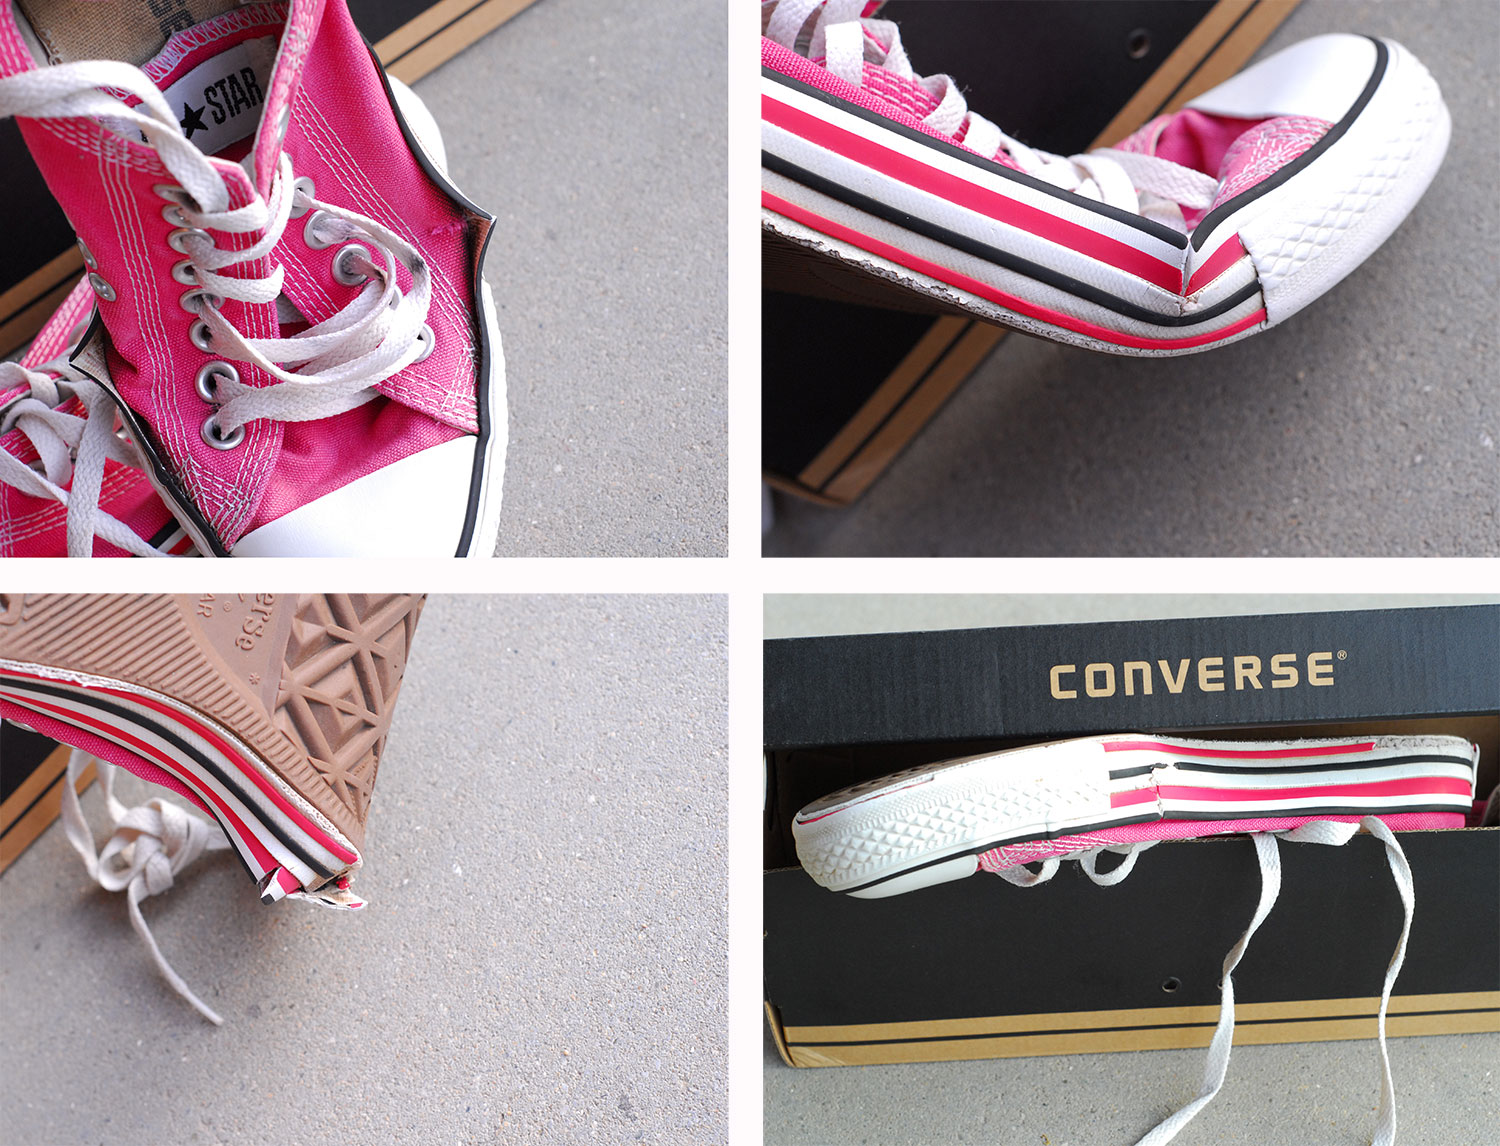 Converse sneakers worn out prematurely